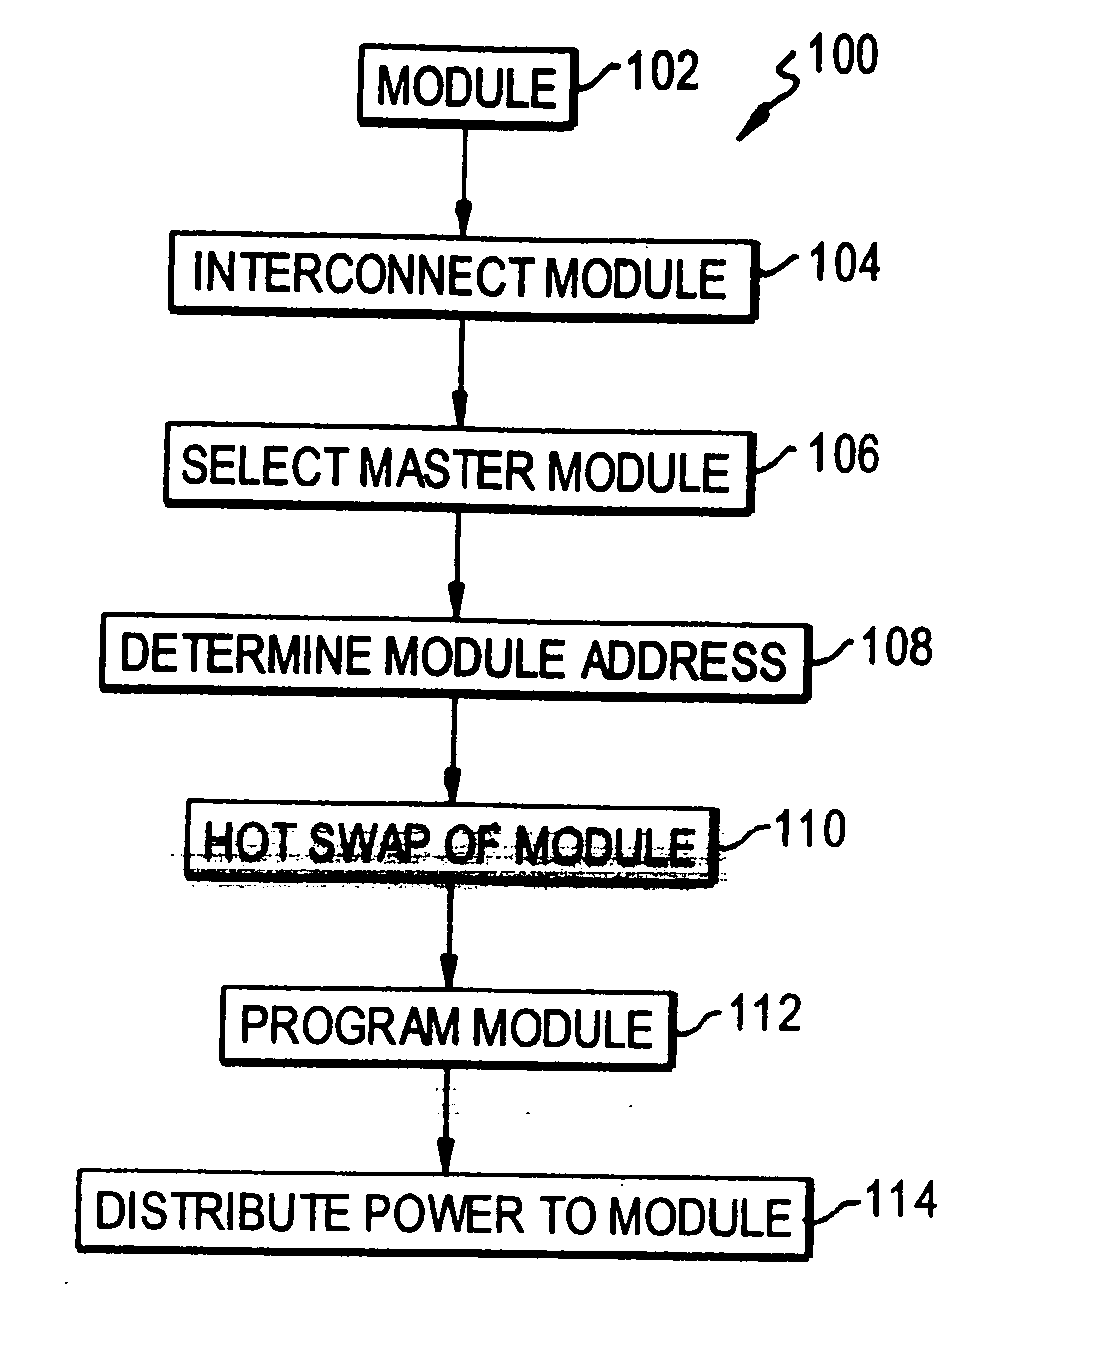 Modular programmable automation controller with multi-processor architecture